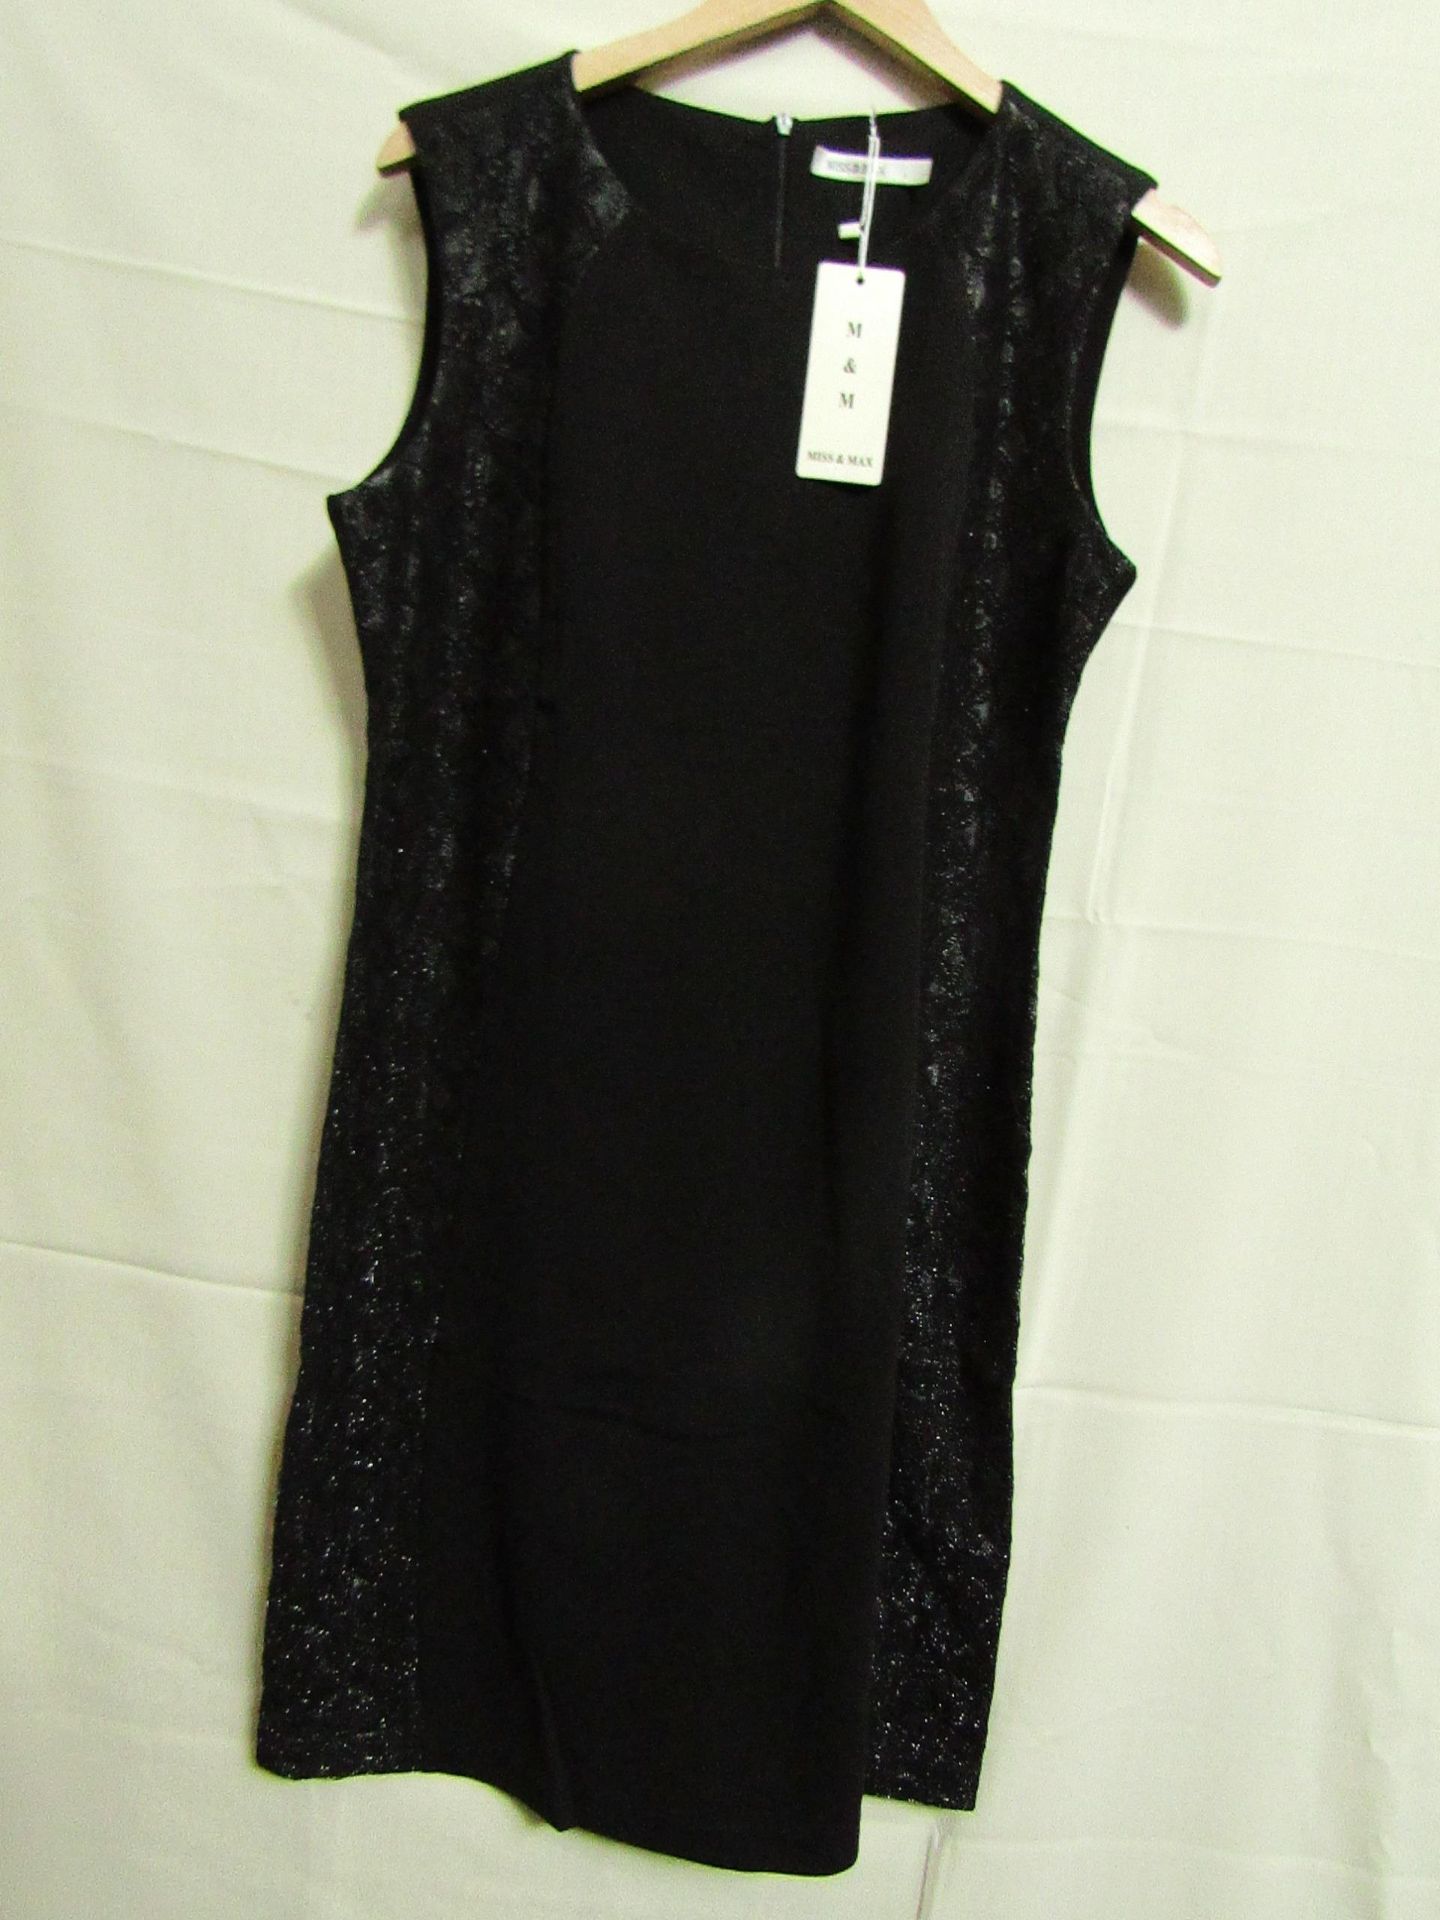 Miss & Max Dress Black With Sparkly Lace Trim Size M New & Packaged